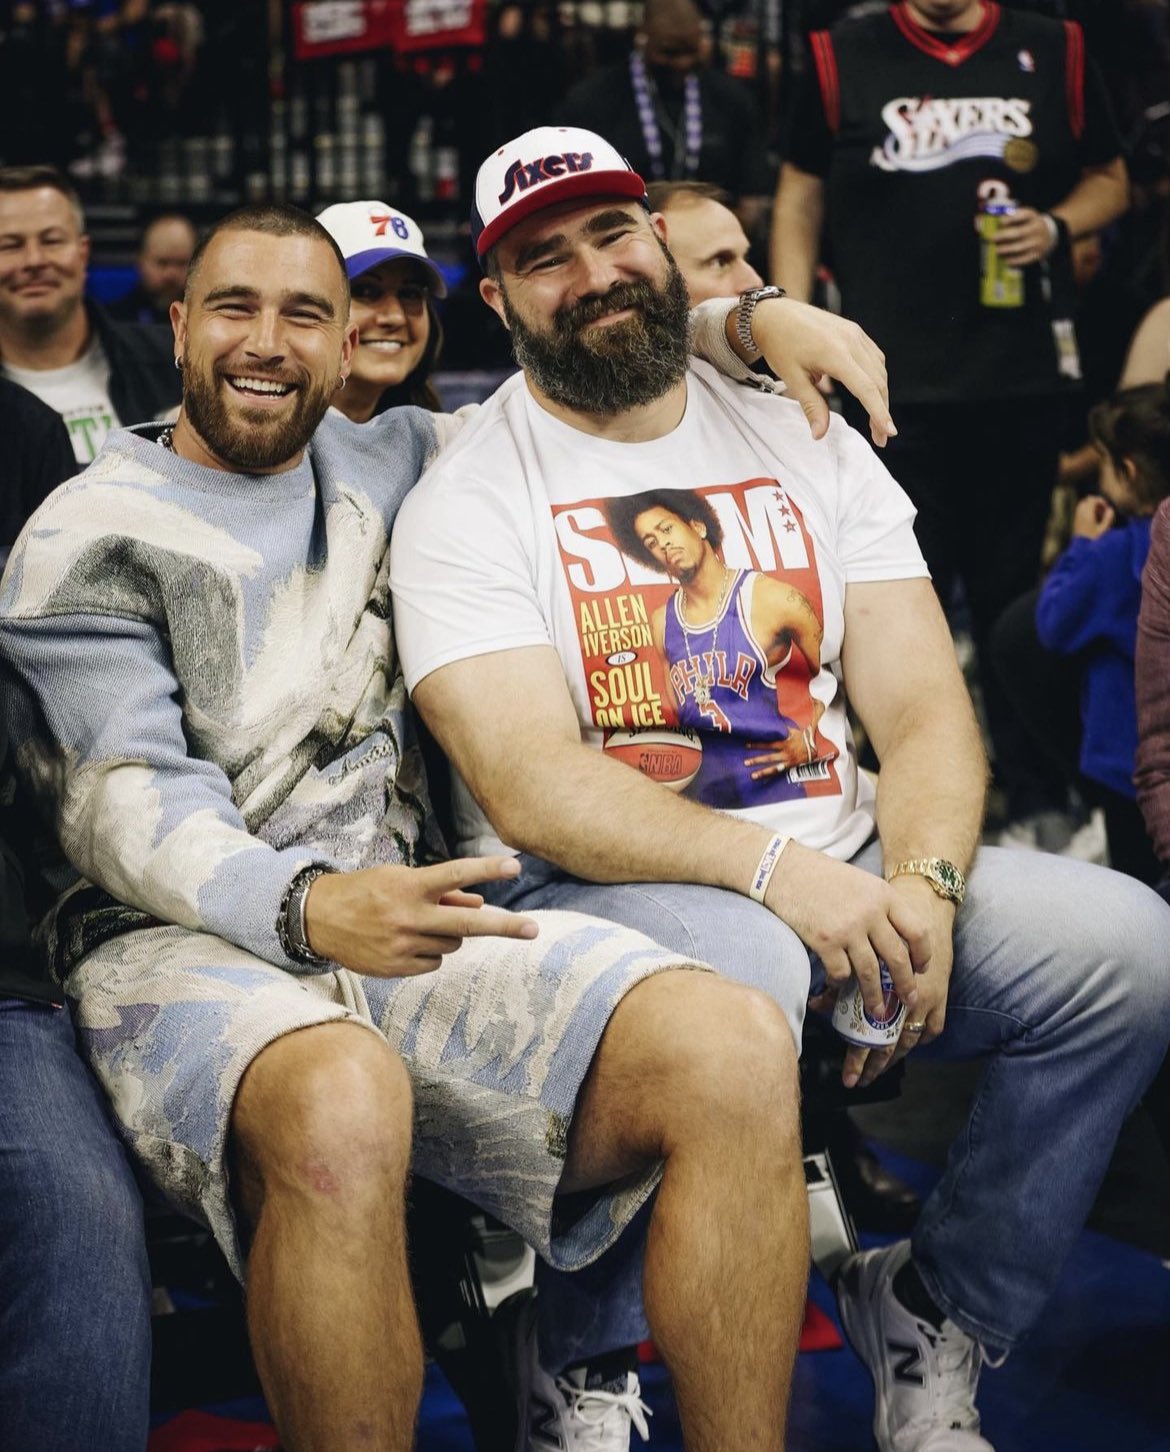 Travis Kelce Fan Page on X: "Couldn't let the day go by without wishing the  one and only @JasonKelce a Happy Birthday 🥳🥳 @tkelce  https://t.co/8iXTYqPBYS" / X